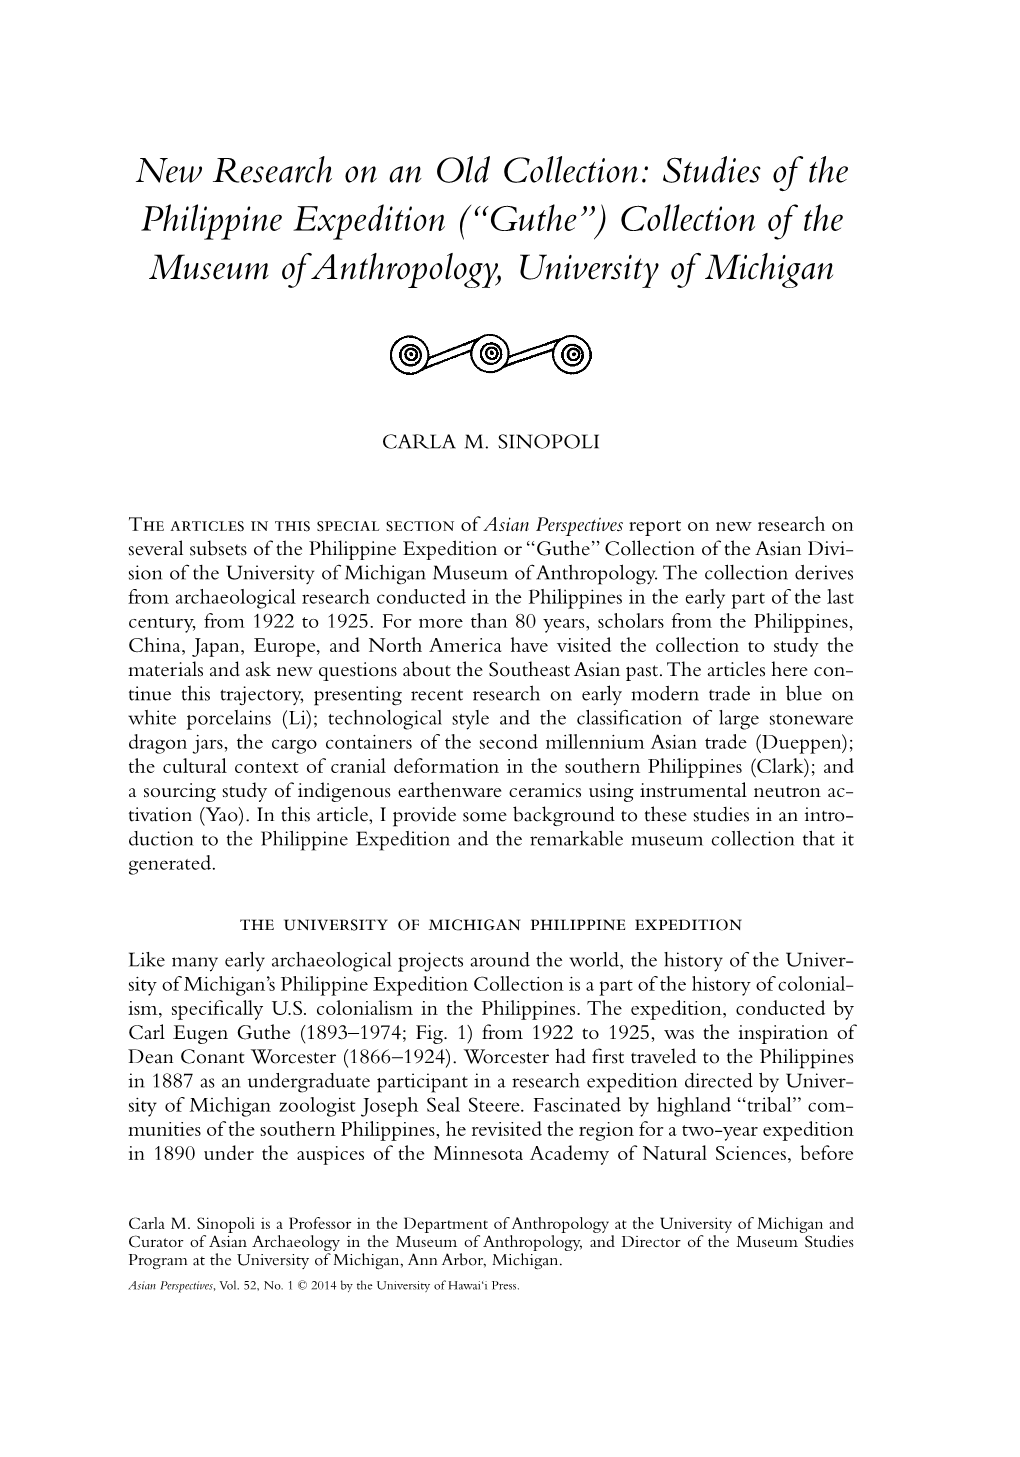 Studies of the Philippine Expedition (“Guthe”) Collection of the Museum of Anthropology, University of Michigan